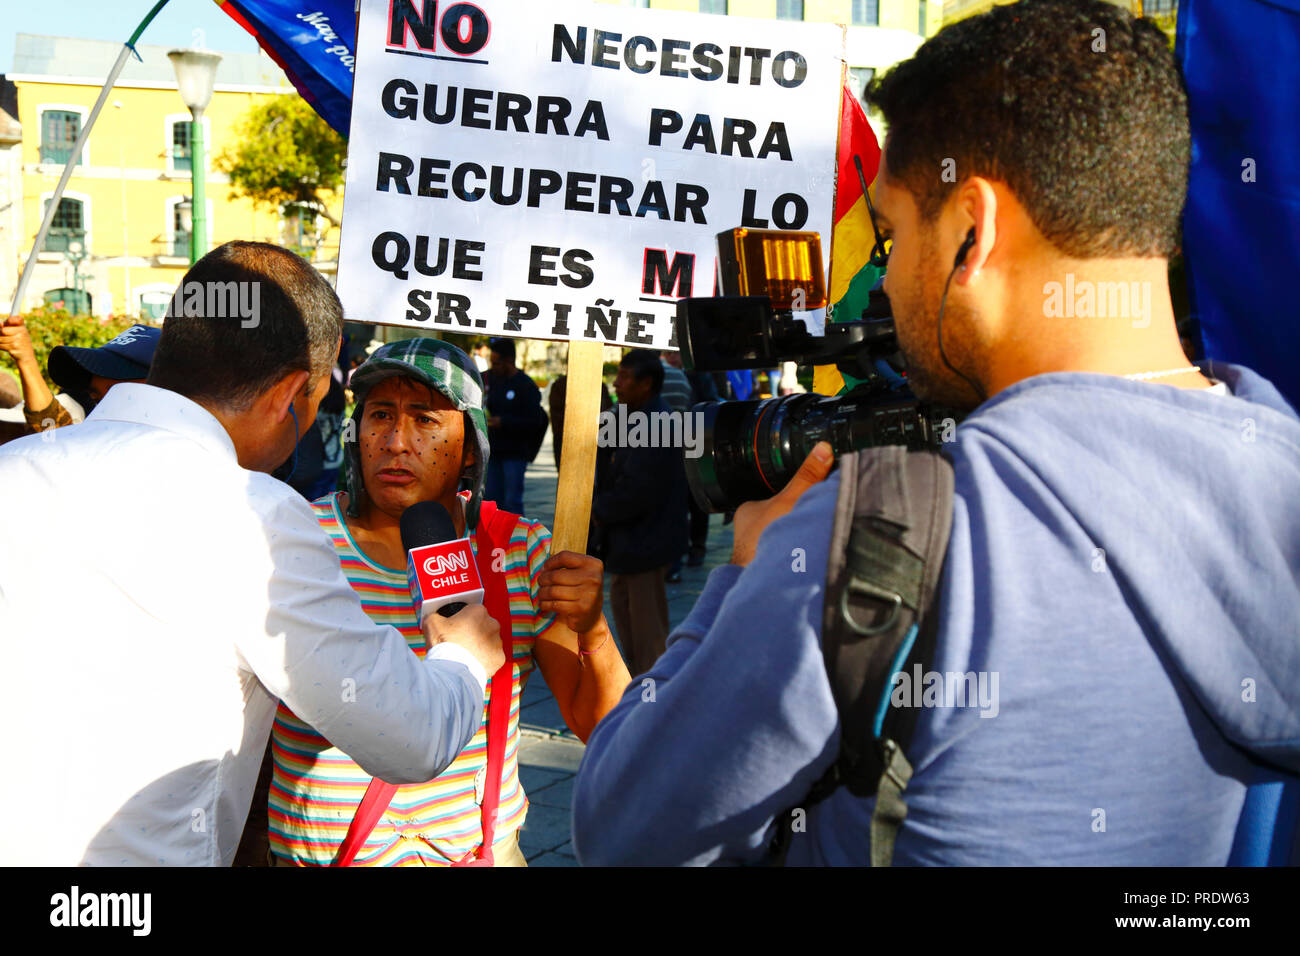 La Paz, Bolivia, 1st October 2018. A man dressed up as the famous Mexican TV character El Chavo from the sitcom El Chavo del Ocho speaks to a CNN Chile reporter before the reading of the ruling for the case 'Obligation to Negotiate Access to the Pacific Ocean (Bolivia v. Chile)' at the International Court of Justice in The Hague. Bolivia presented the case to the ICJ in 2013; Bolivia lost its coastal Litoral province to Chile during the War of the Pacific (1879-1884) and previous negotiations have made no progress from Bolivia's viewpoint. Credit: James Brunker/Alamy Live News Stock Photo